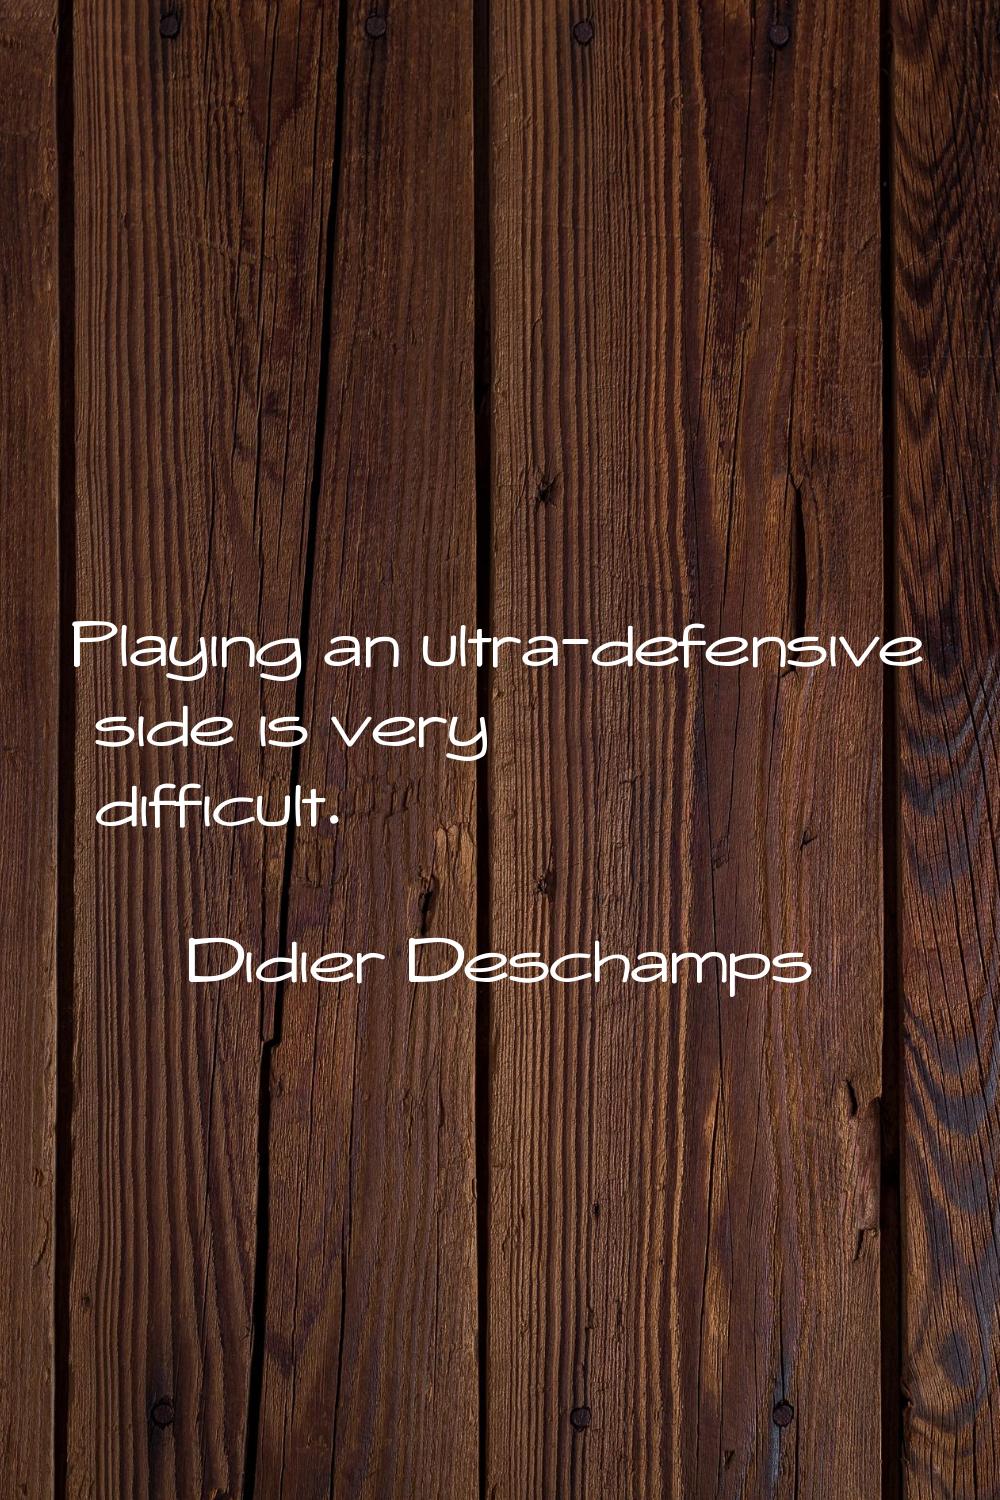 Playing an ultra-defensive side is very difficult.